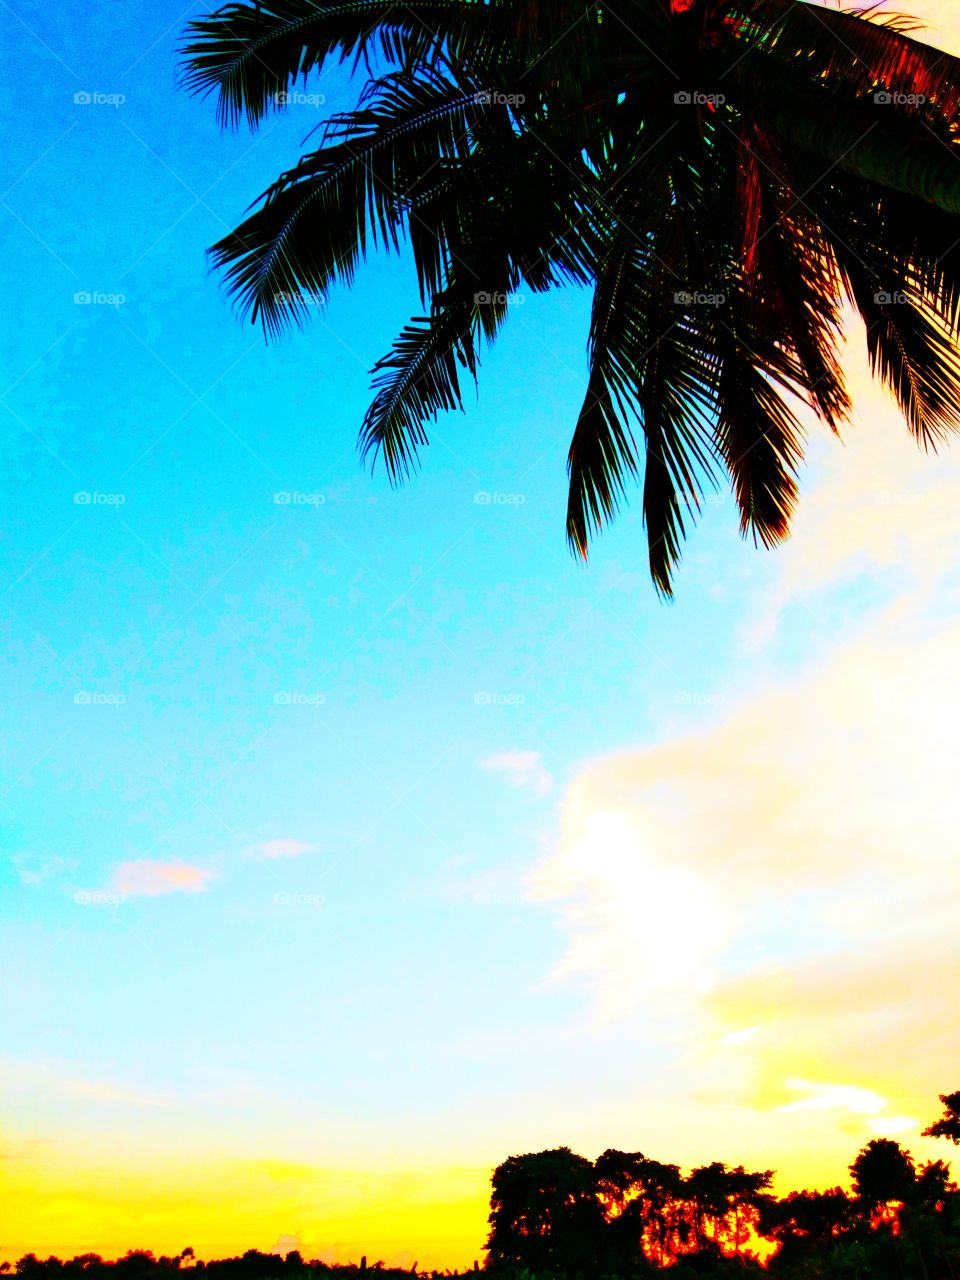 A Very Beautiful Evening Time Nature, With Coconut Tree.